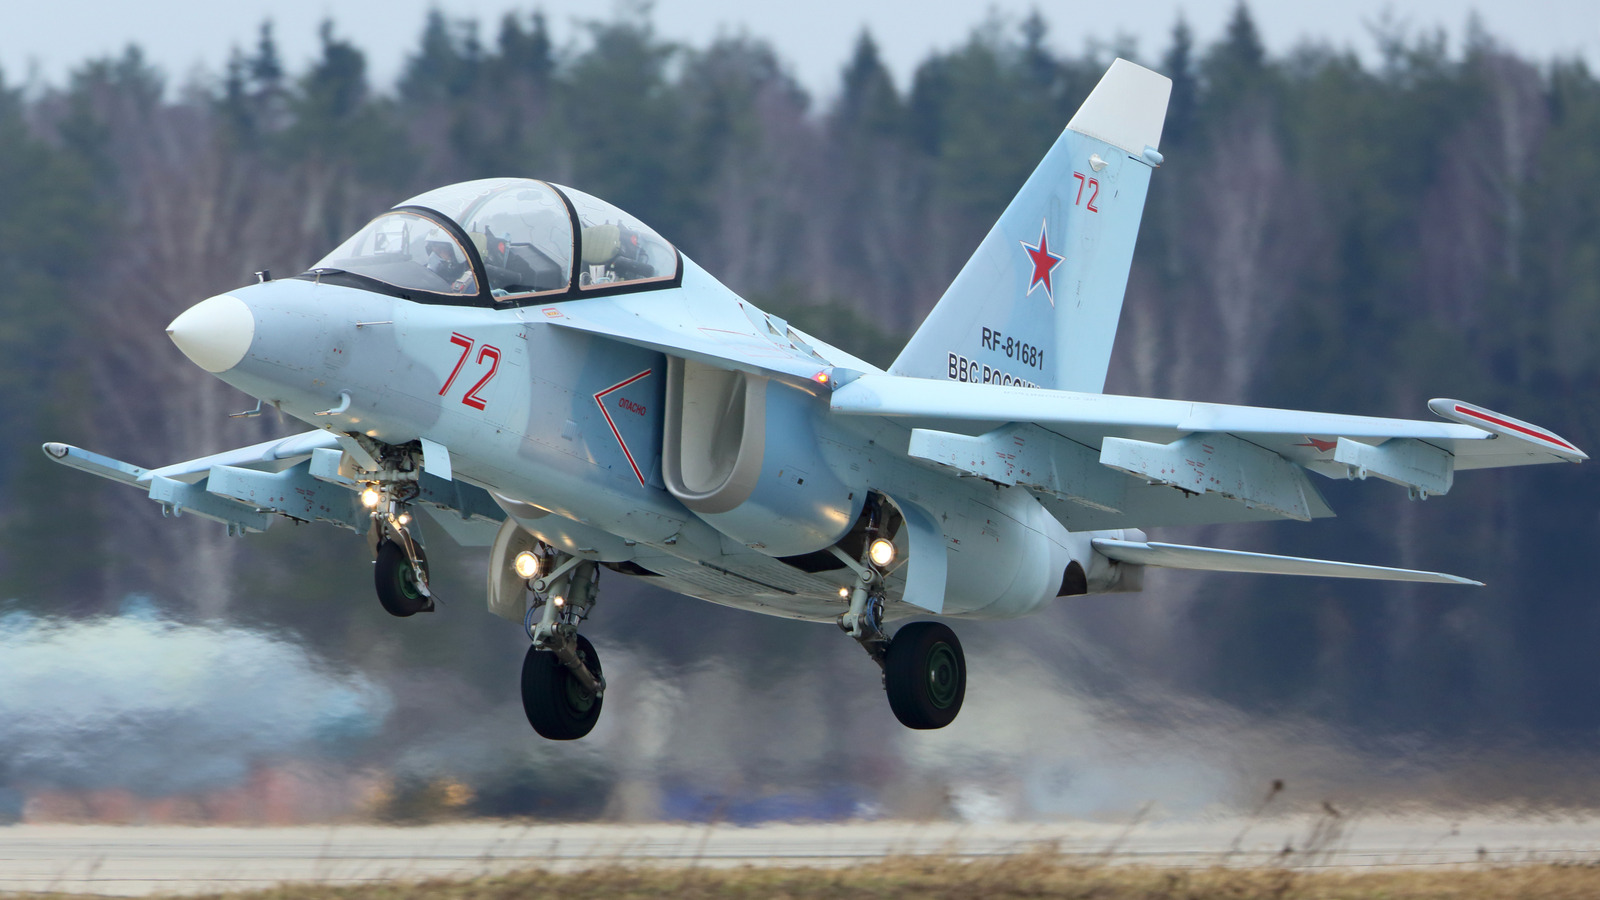 All About The Yak-130 Combat Training Jet